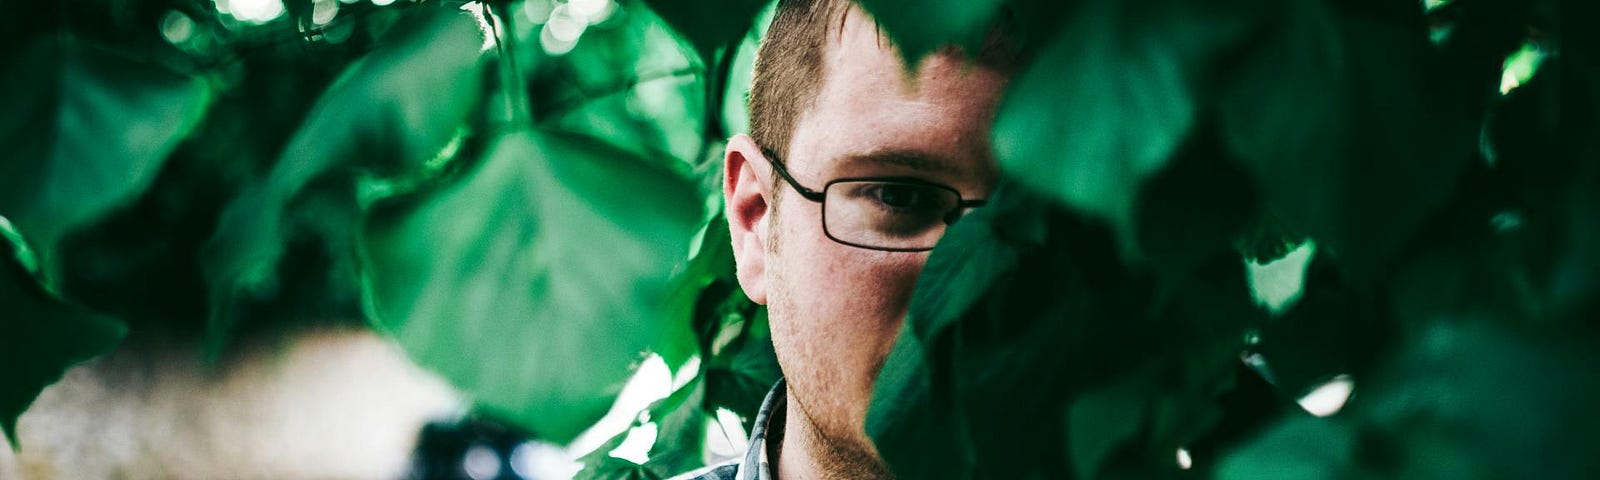 A man with eyeglasses standing behind green leaves.